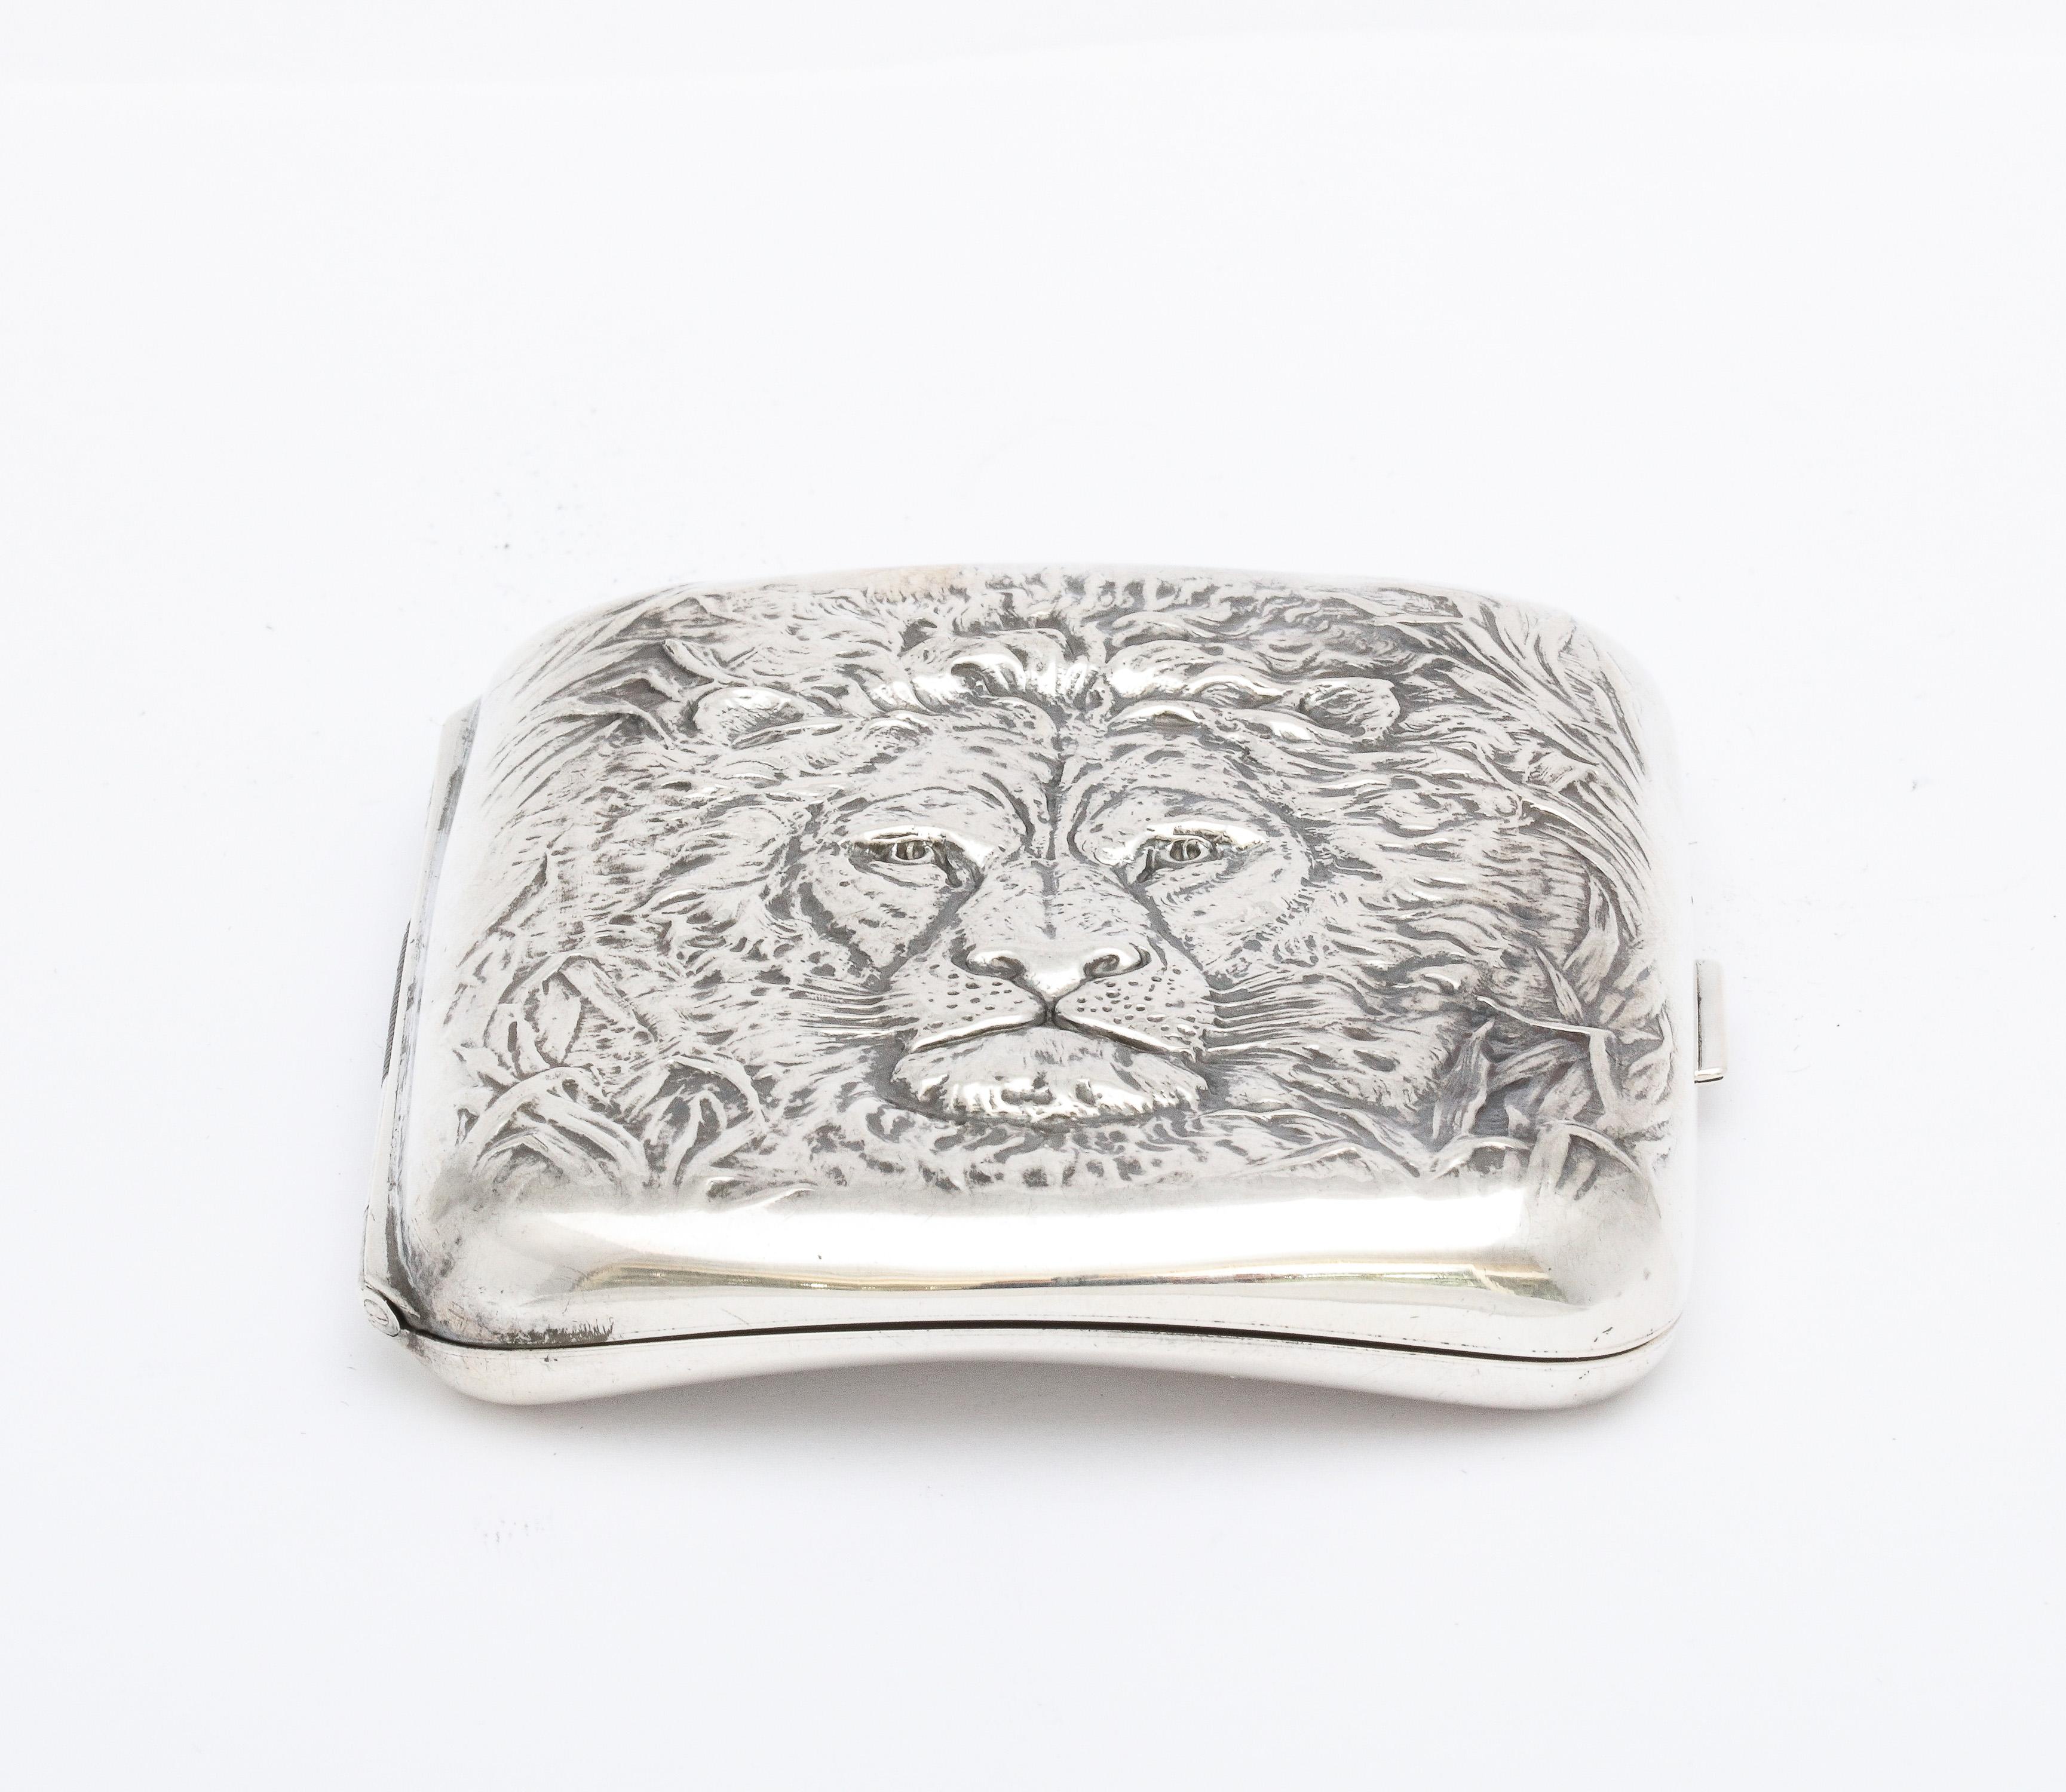  Sterling Silver Lion's Head-Motif Cigarette Case and Matching Cutter 1